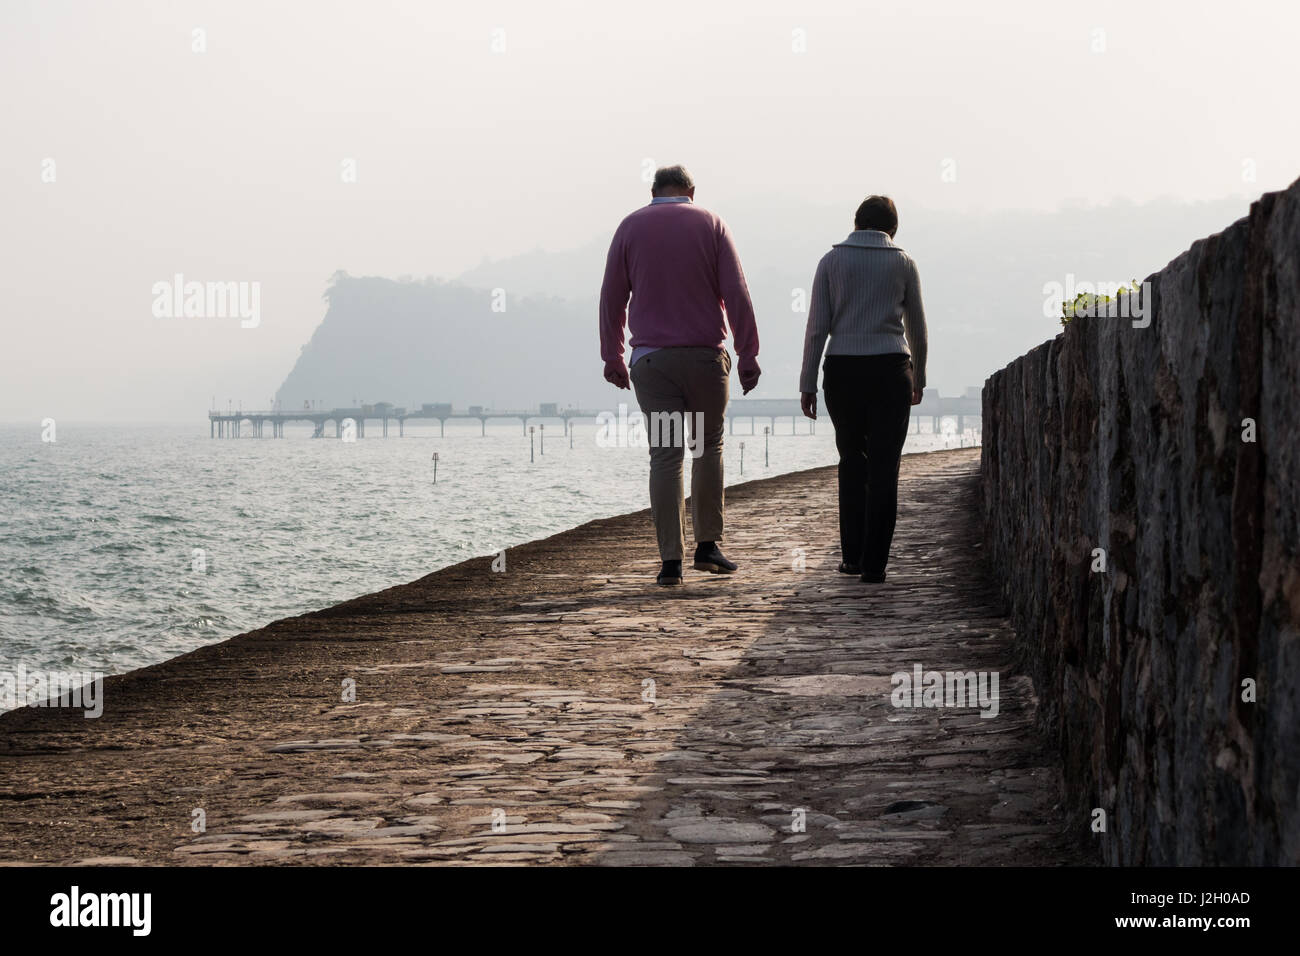 A man and a women walk along Teignmouth sea front railway path with the pier and The Ness rock in the background. Stock Photo